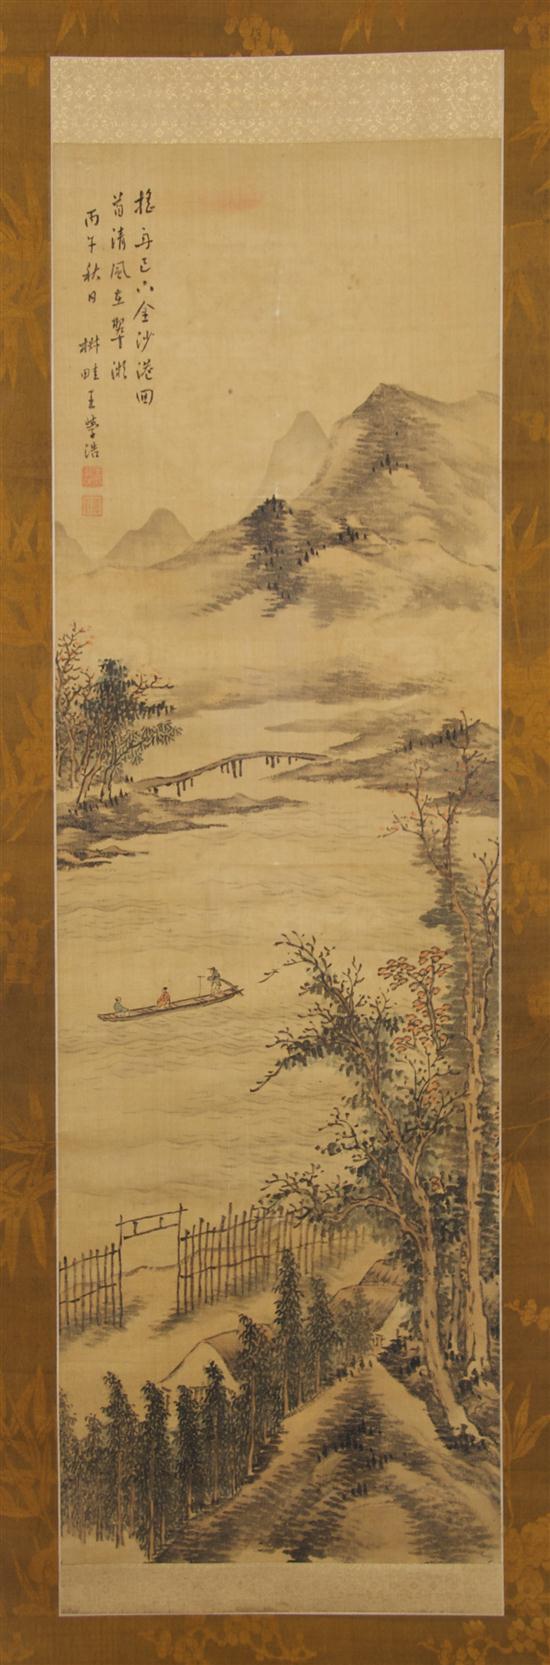 A Chinese Landscape Painting on